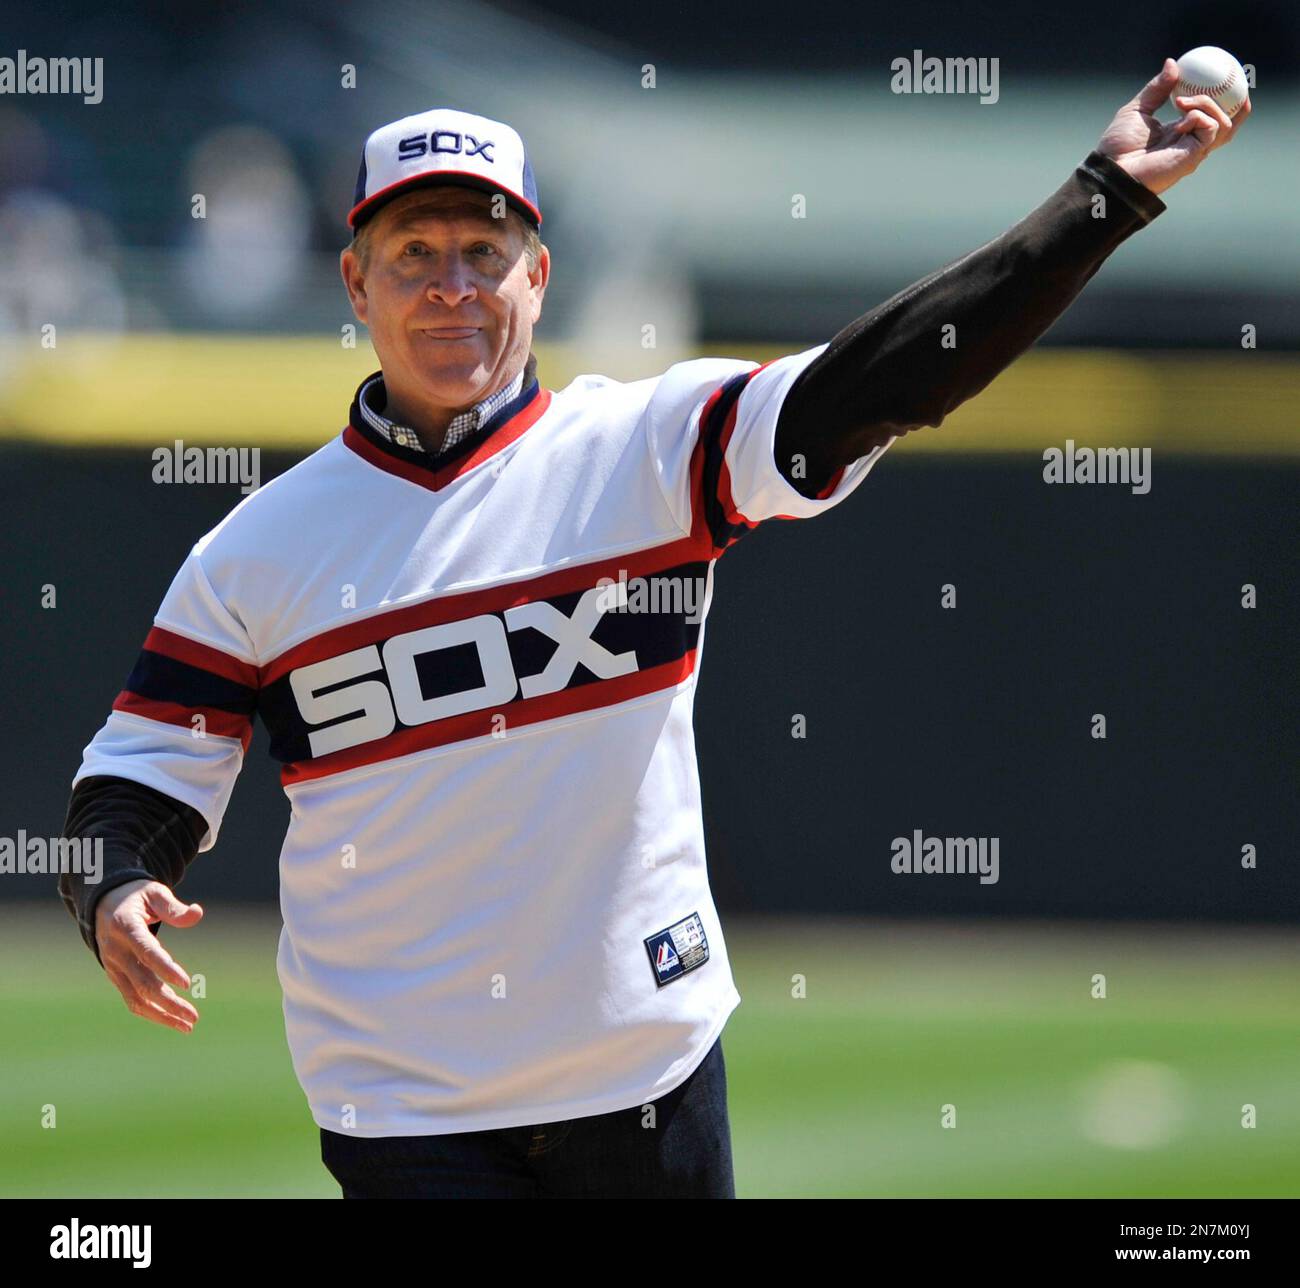 Former Chicago White Sox player Mike Squires, from the 1983 team throws out  the ceremonial first pitch before an MLB baseball game between the Chicago  White Sox and the Minnesota Twins in